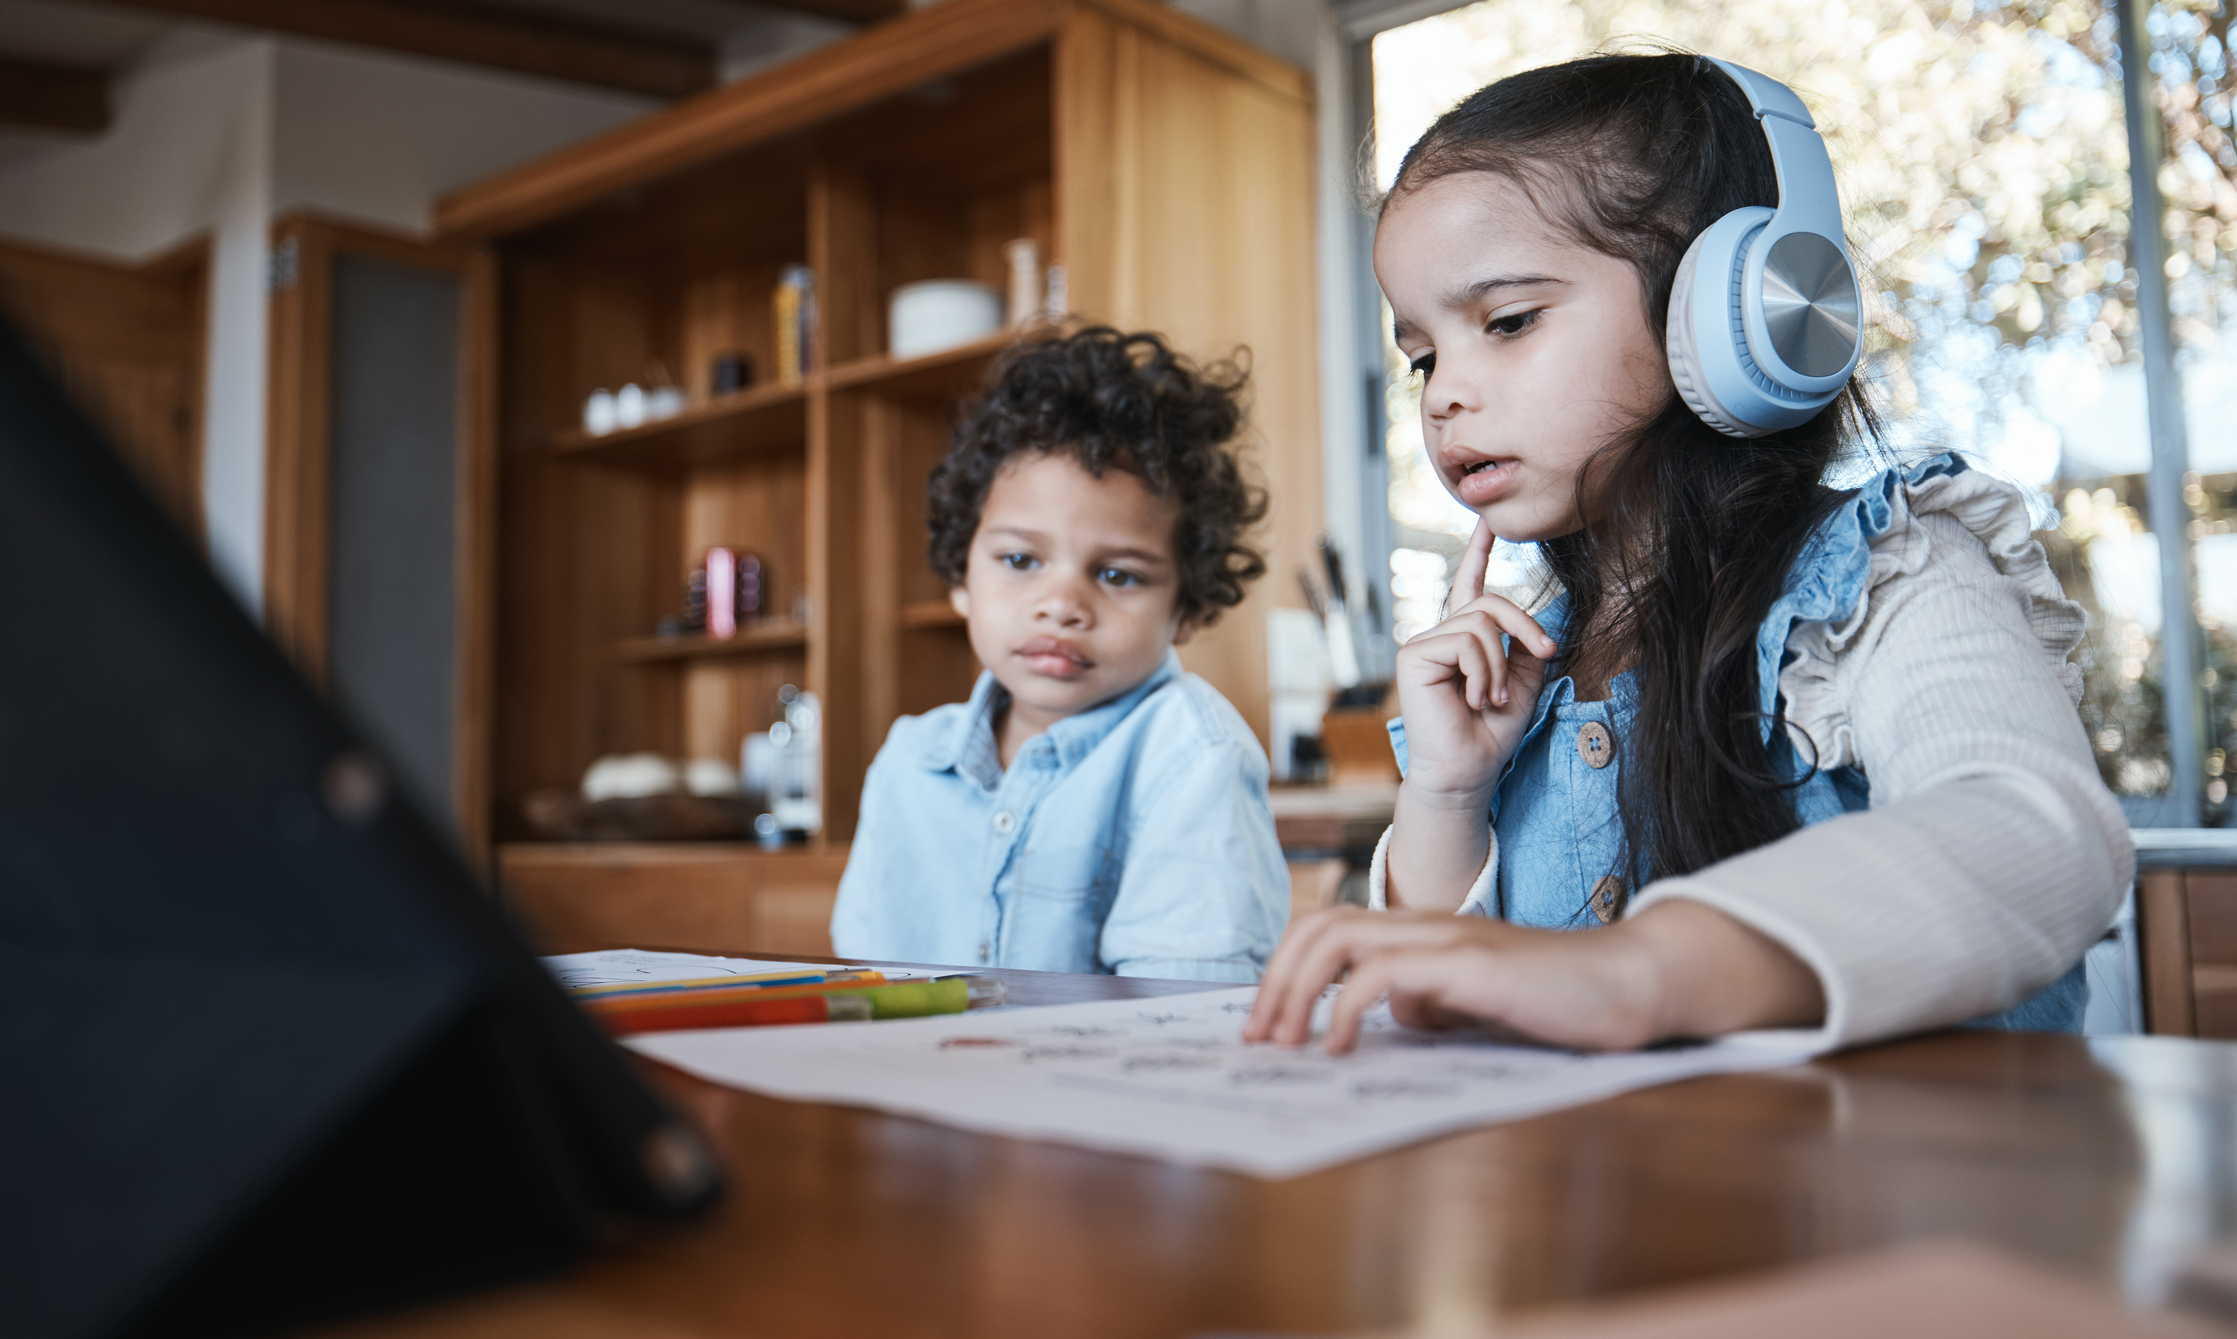 A young girl with wavy brown hair wears noise-cancelling headphones so she can focus on her homework while her younger brother tries to distract her